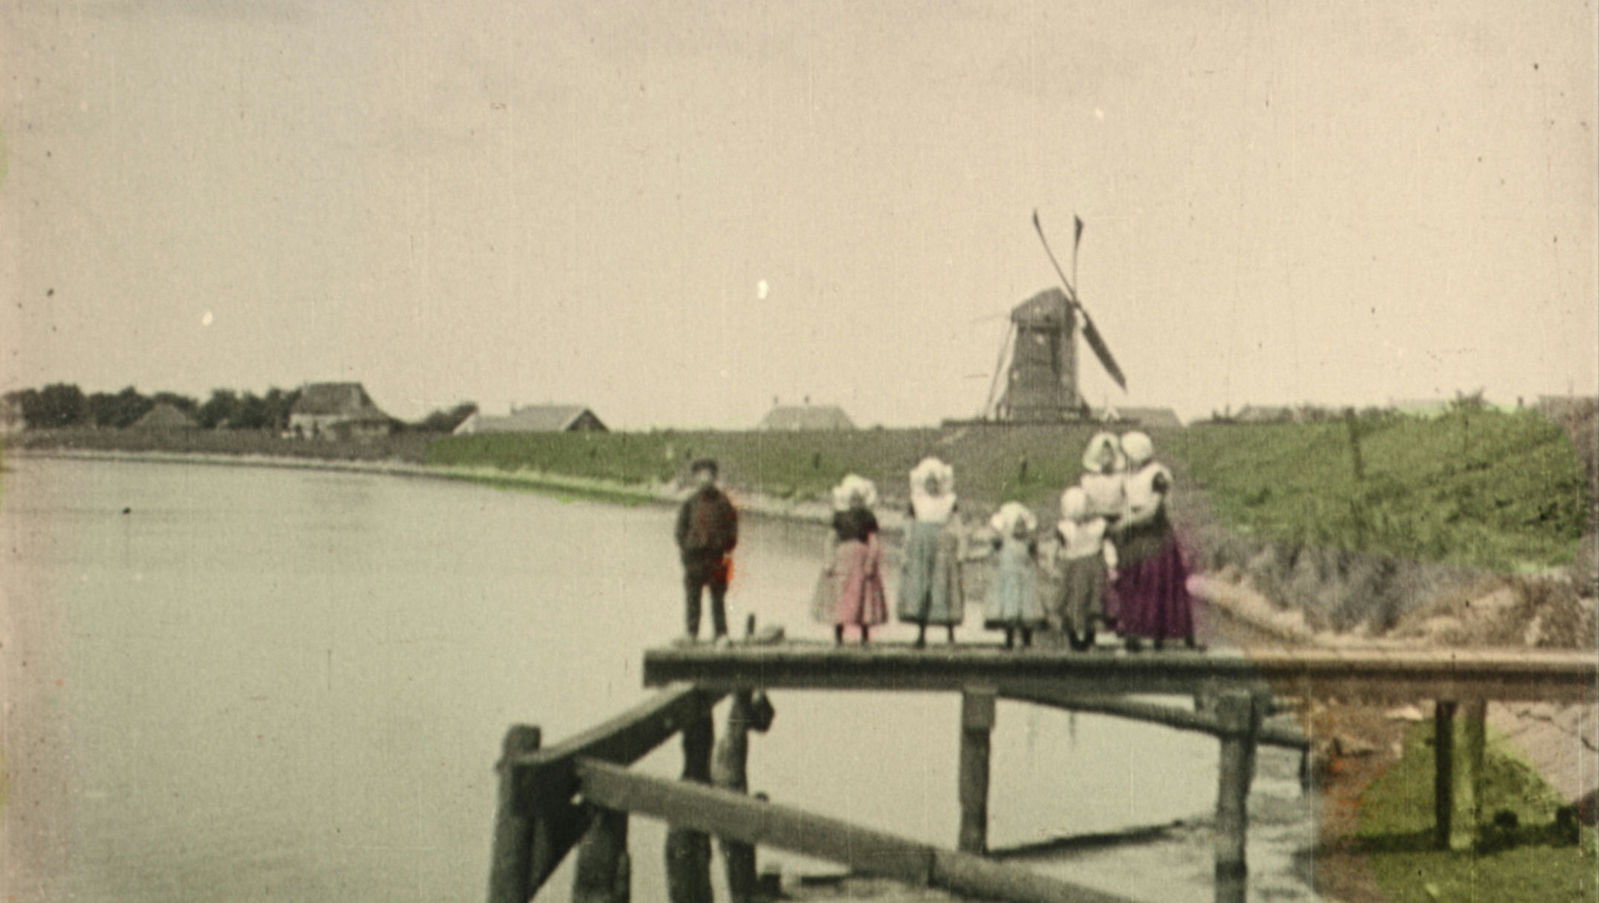 A color-tinted turn of the twentieth century image of people in period clothes standing on a dock over a lake and looking at a windmill